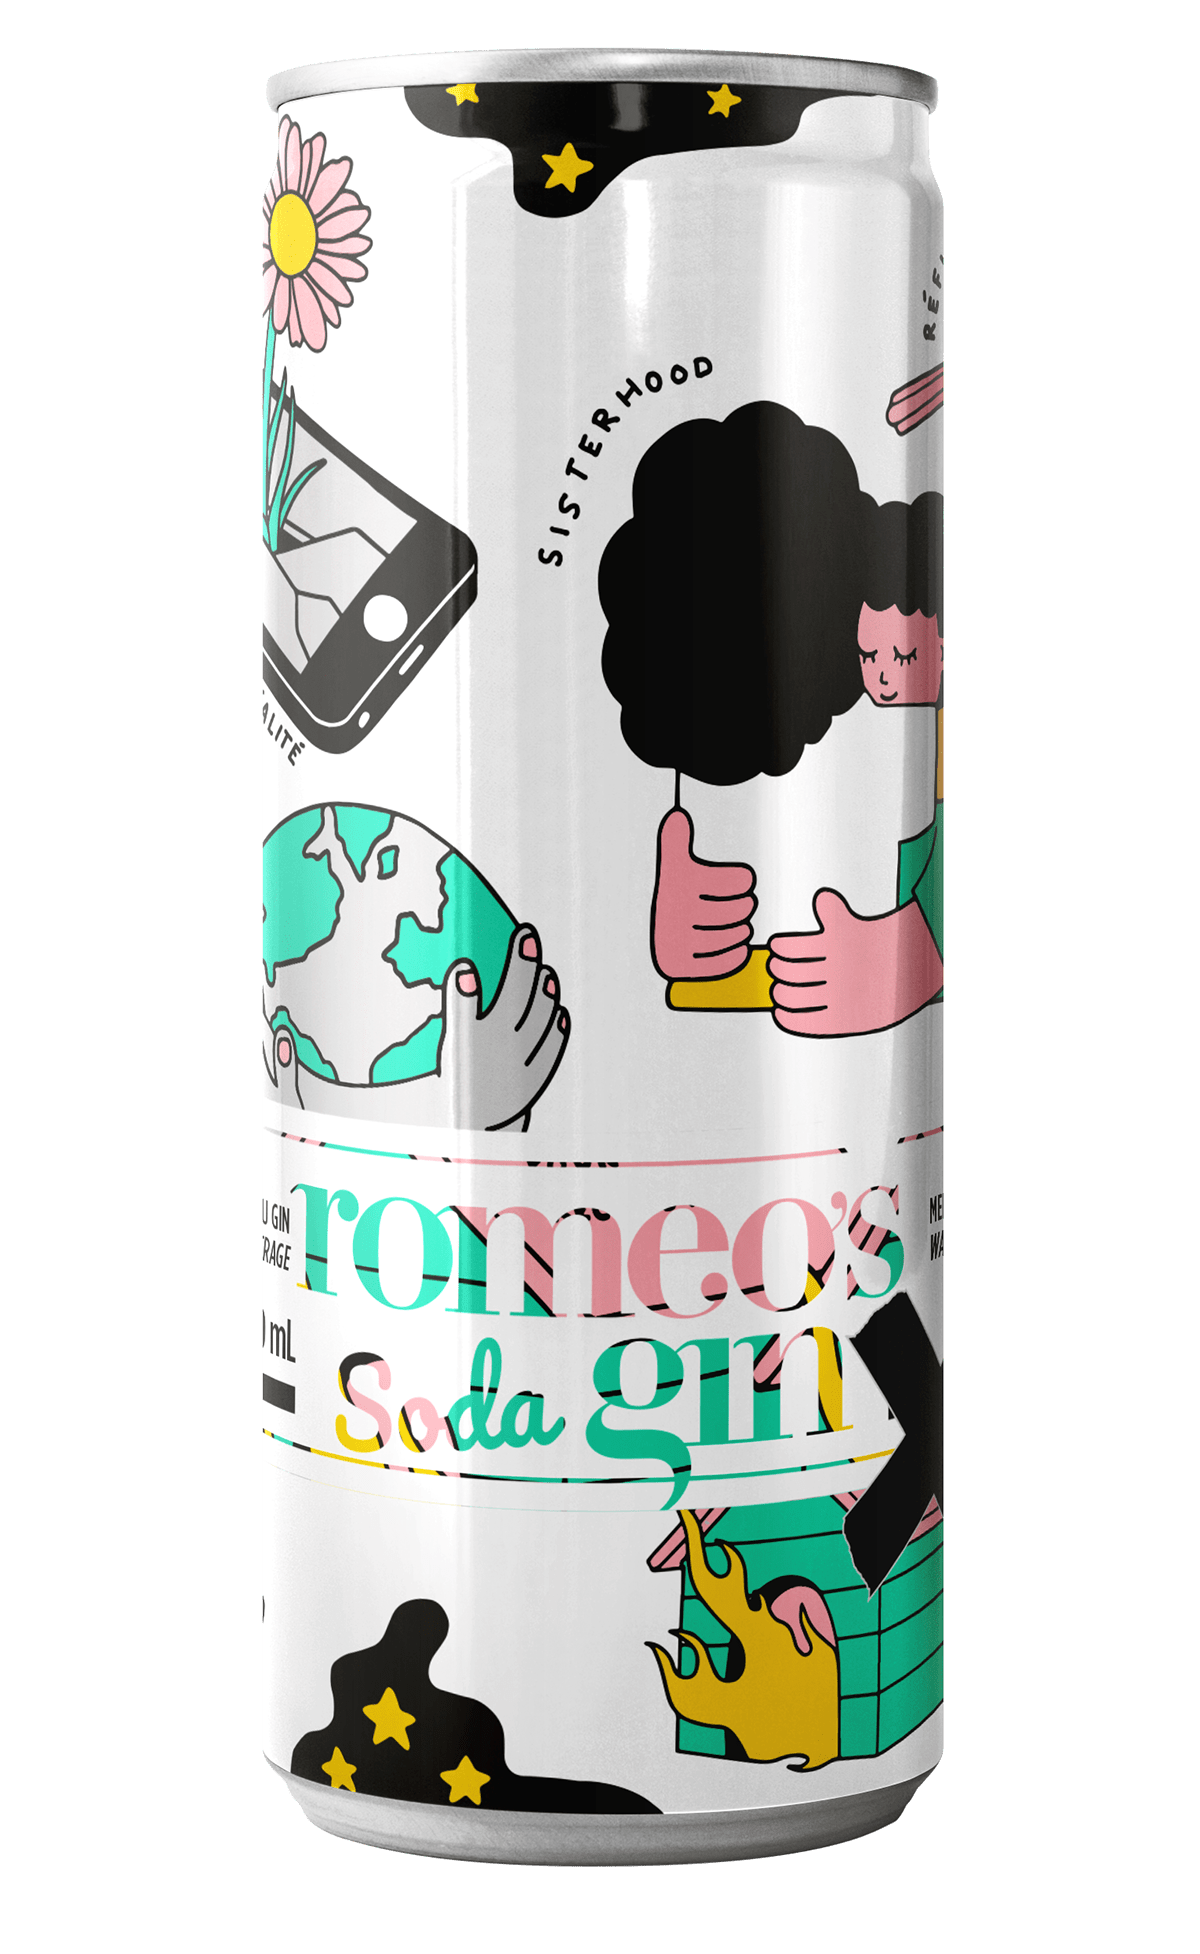 romeo's gin x soda, a gin and soda with watermelon and lime aromas featuring an artwork by PONY